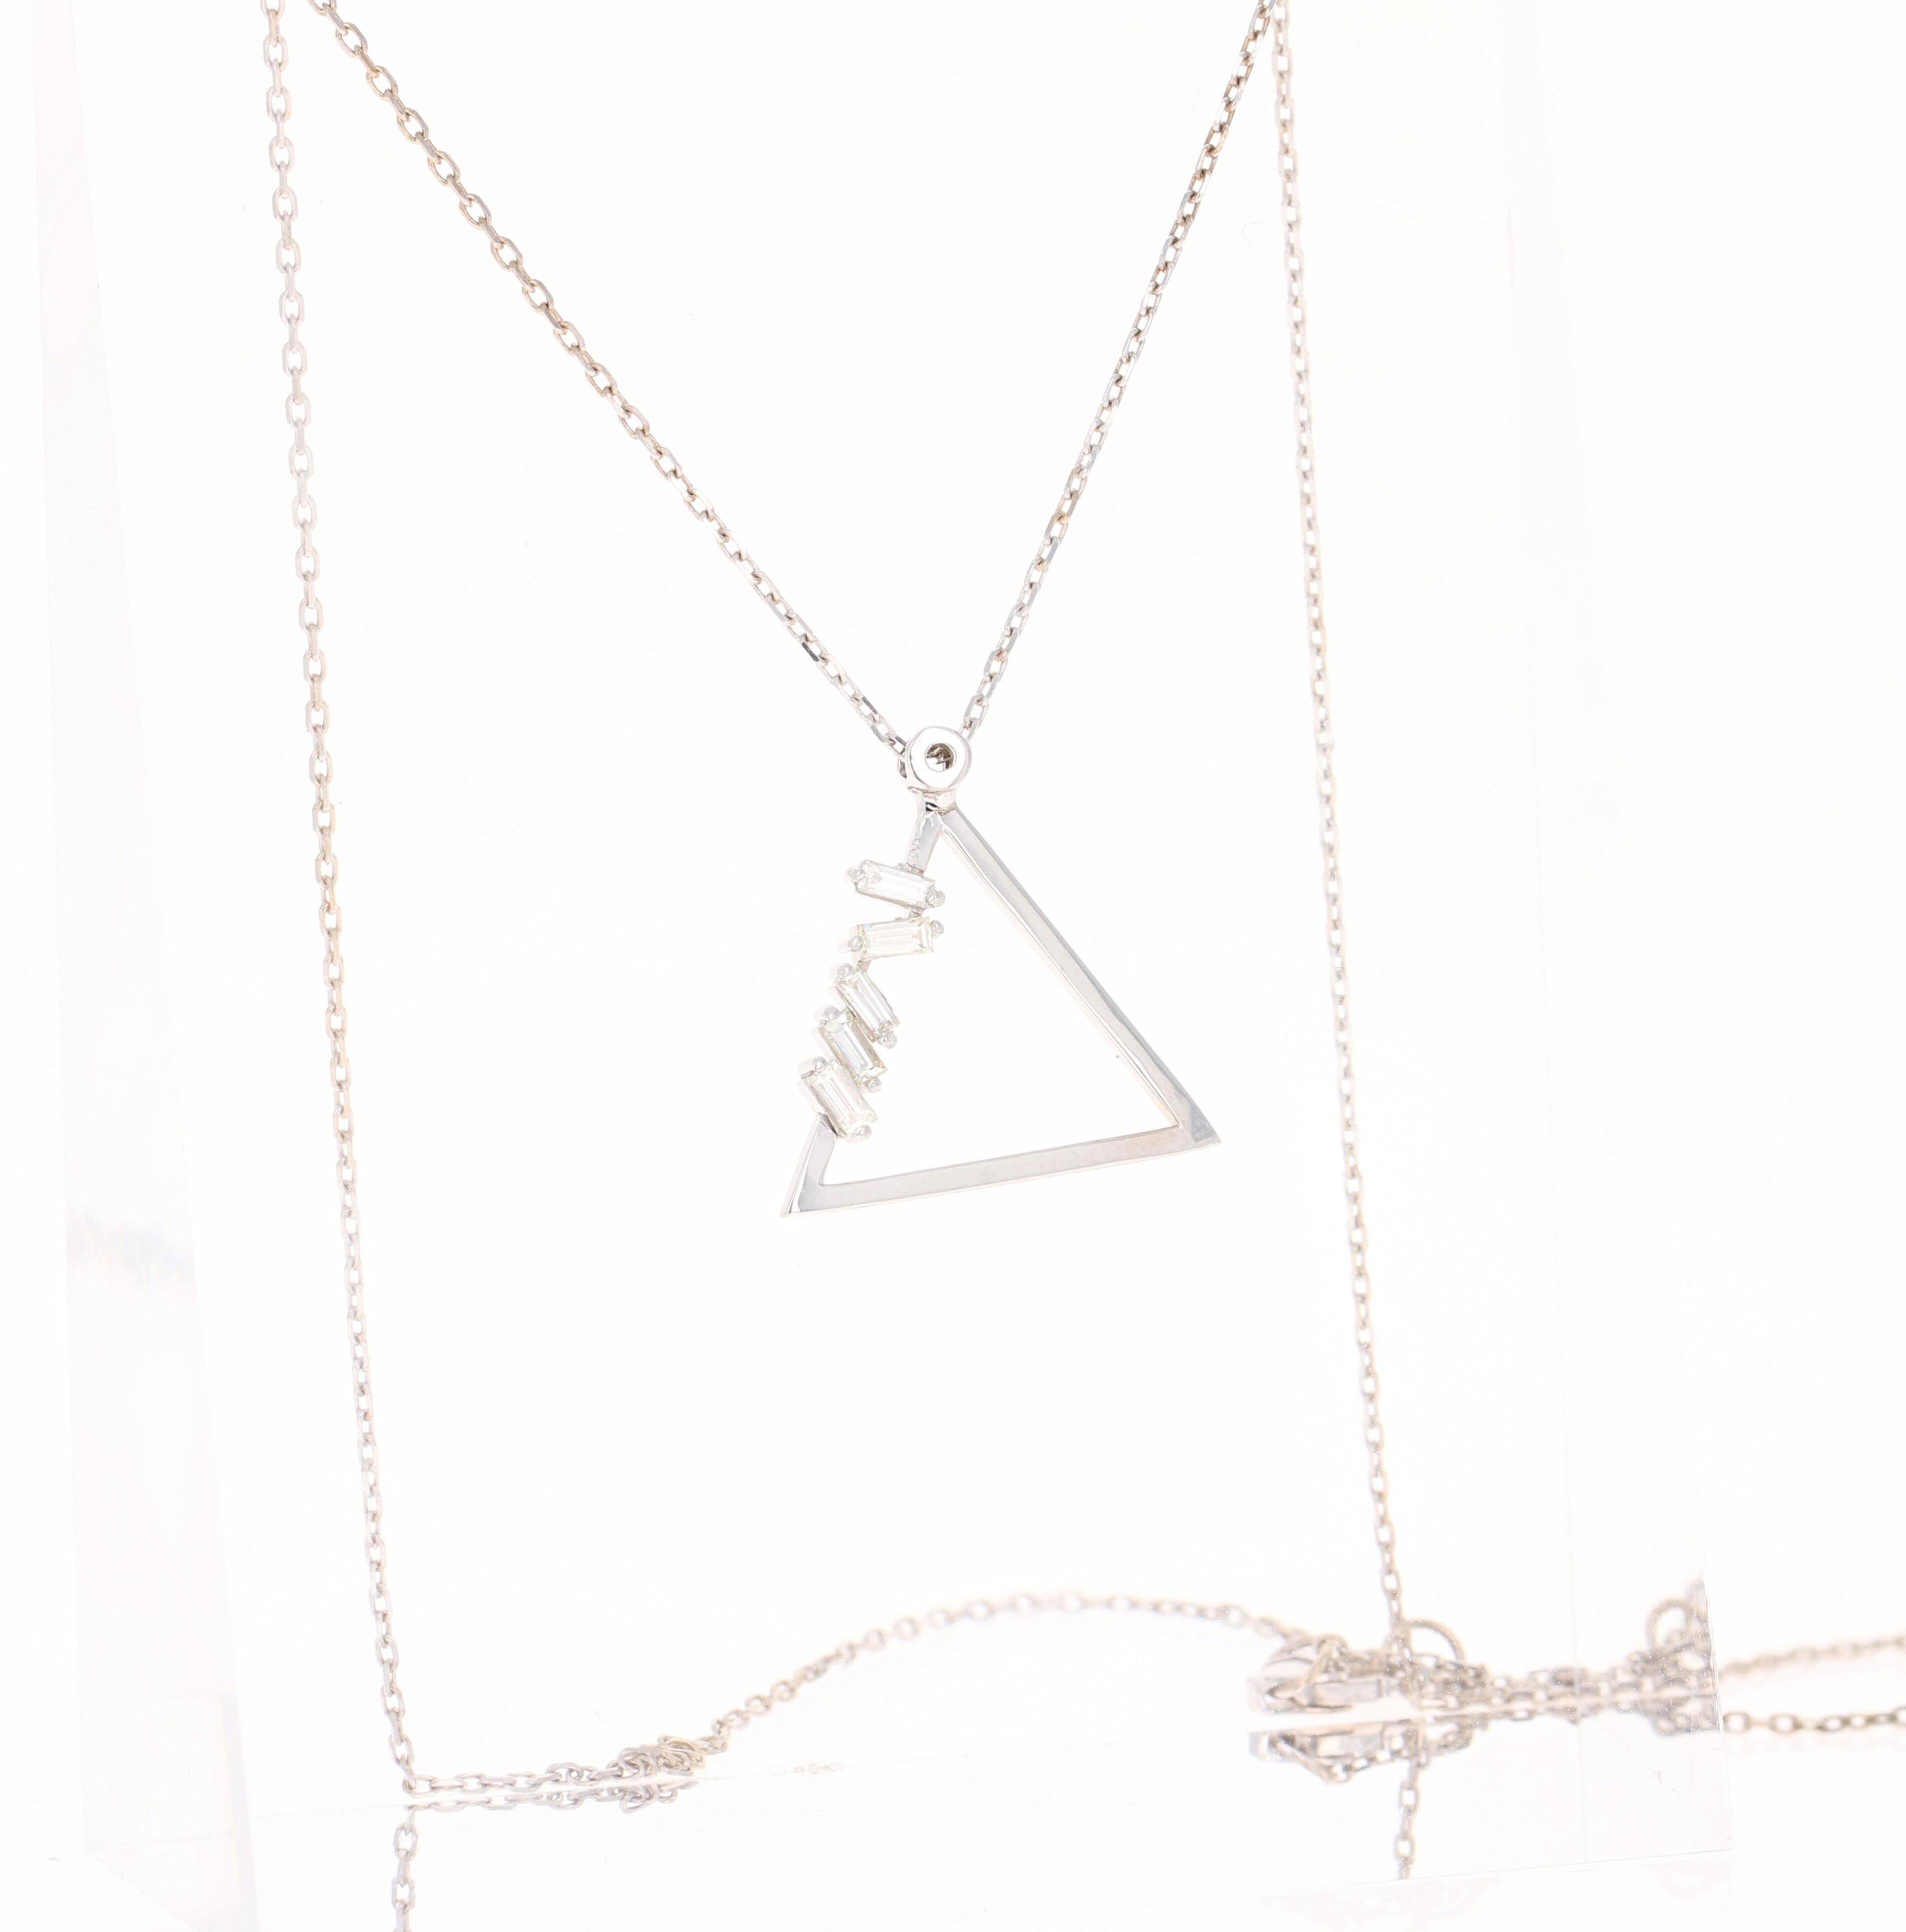 This Chain Necklace has a Triangle Shaped pendant that has 5 Baguette Cut Diamonds that weigh 0.21 carats (Clarity: VS, Color: H) The total carat weight of the Pendant is 0.21 Carats.

It is beautifully curated in 14 Karat White Gold and weighs